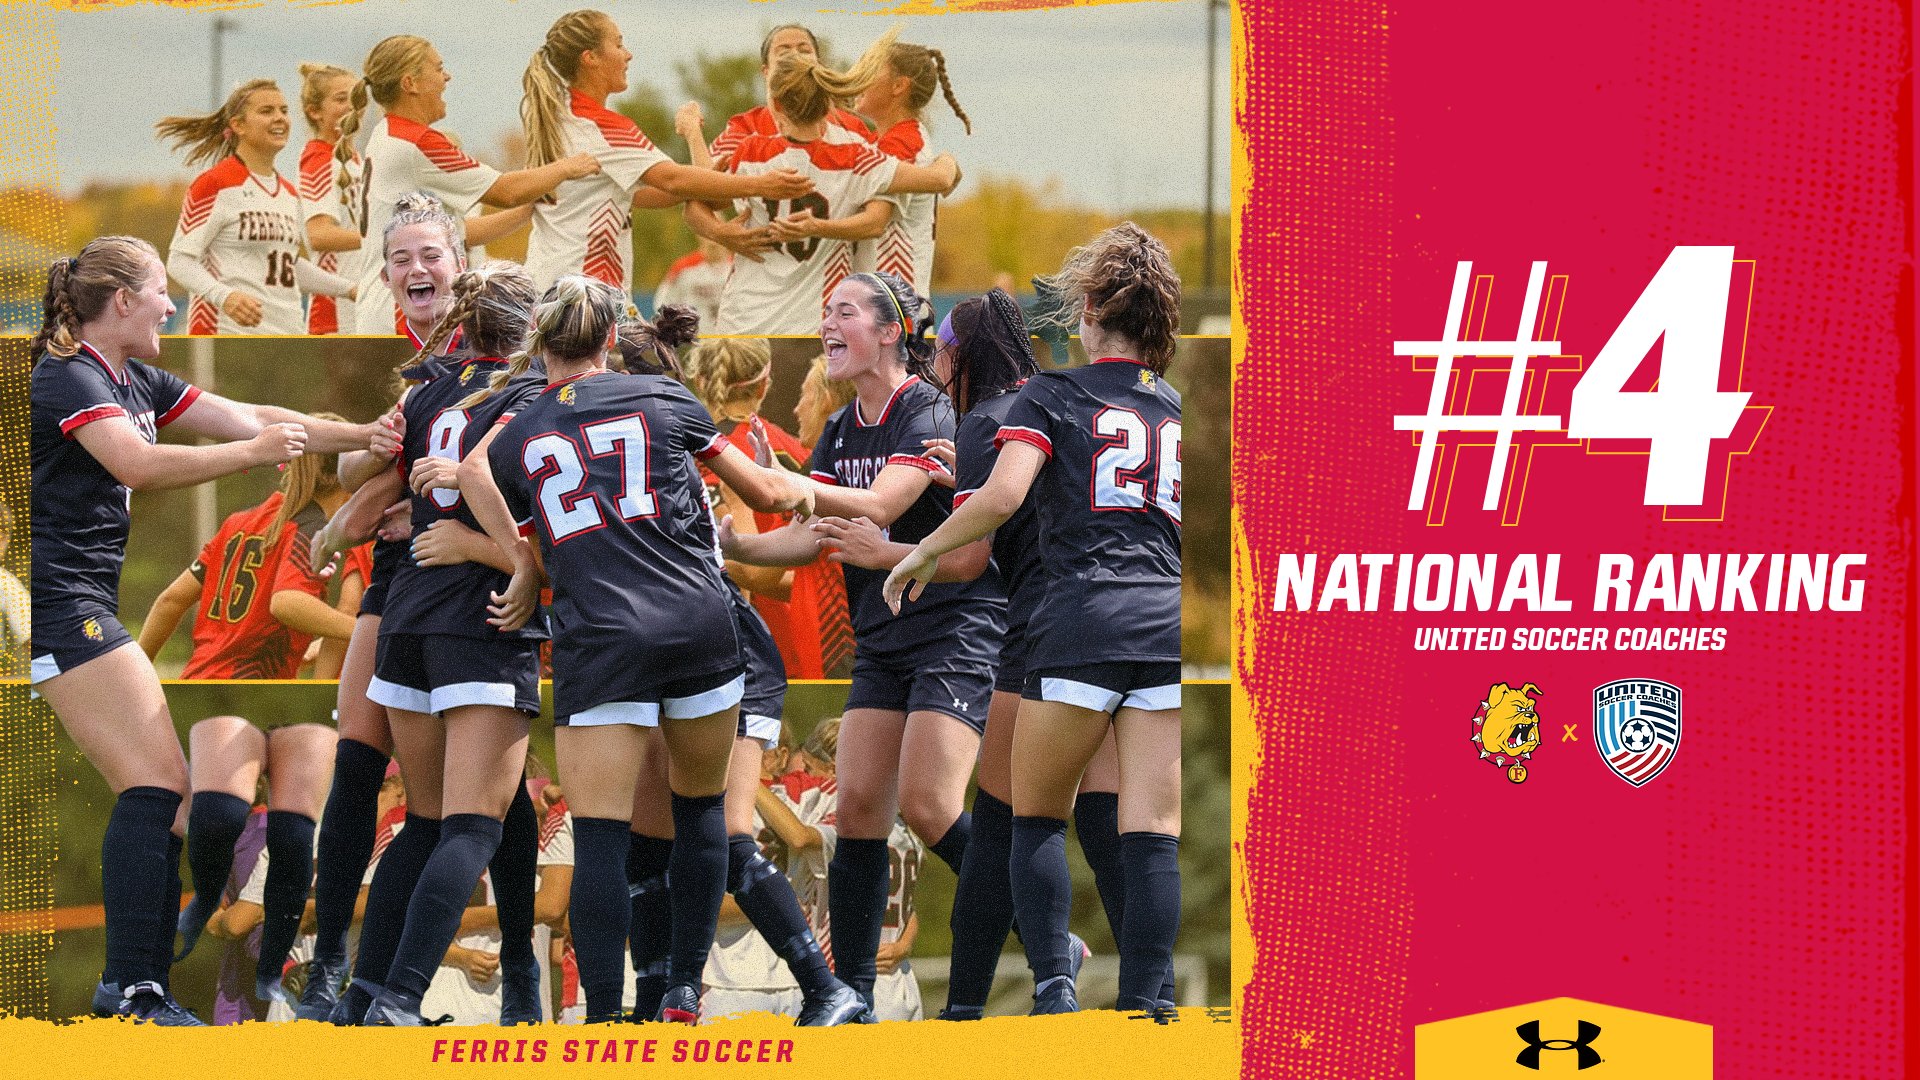 Ferris State Soccer Achieves Highest National Ranking In School History At #4 This Week